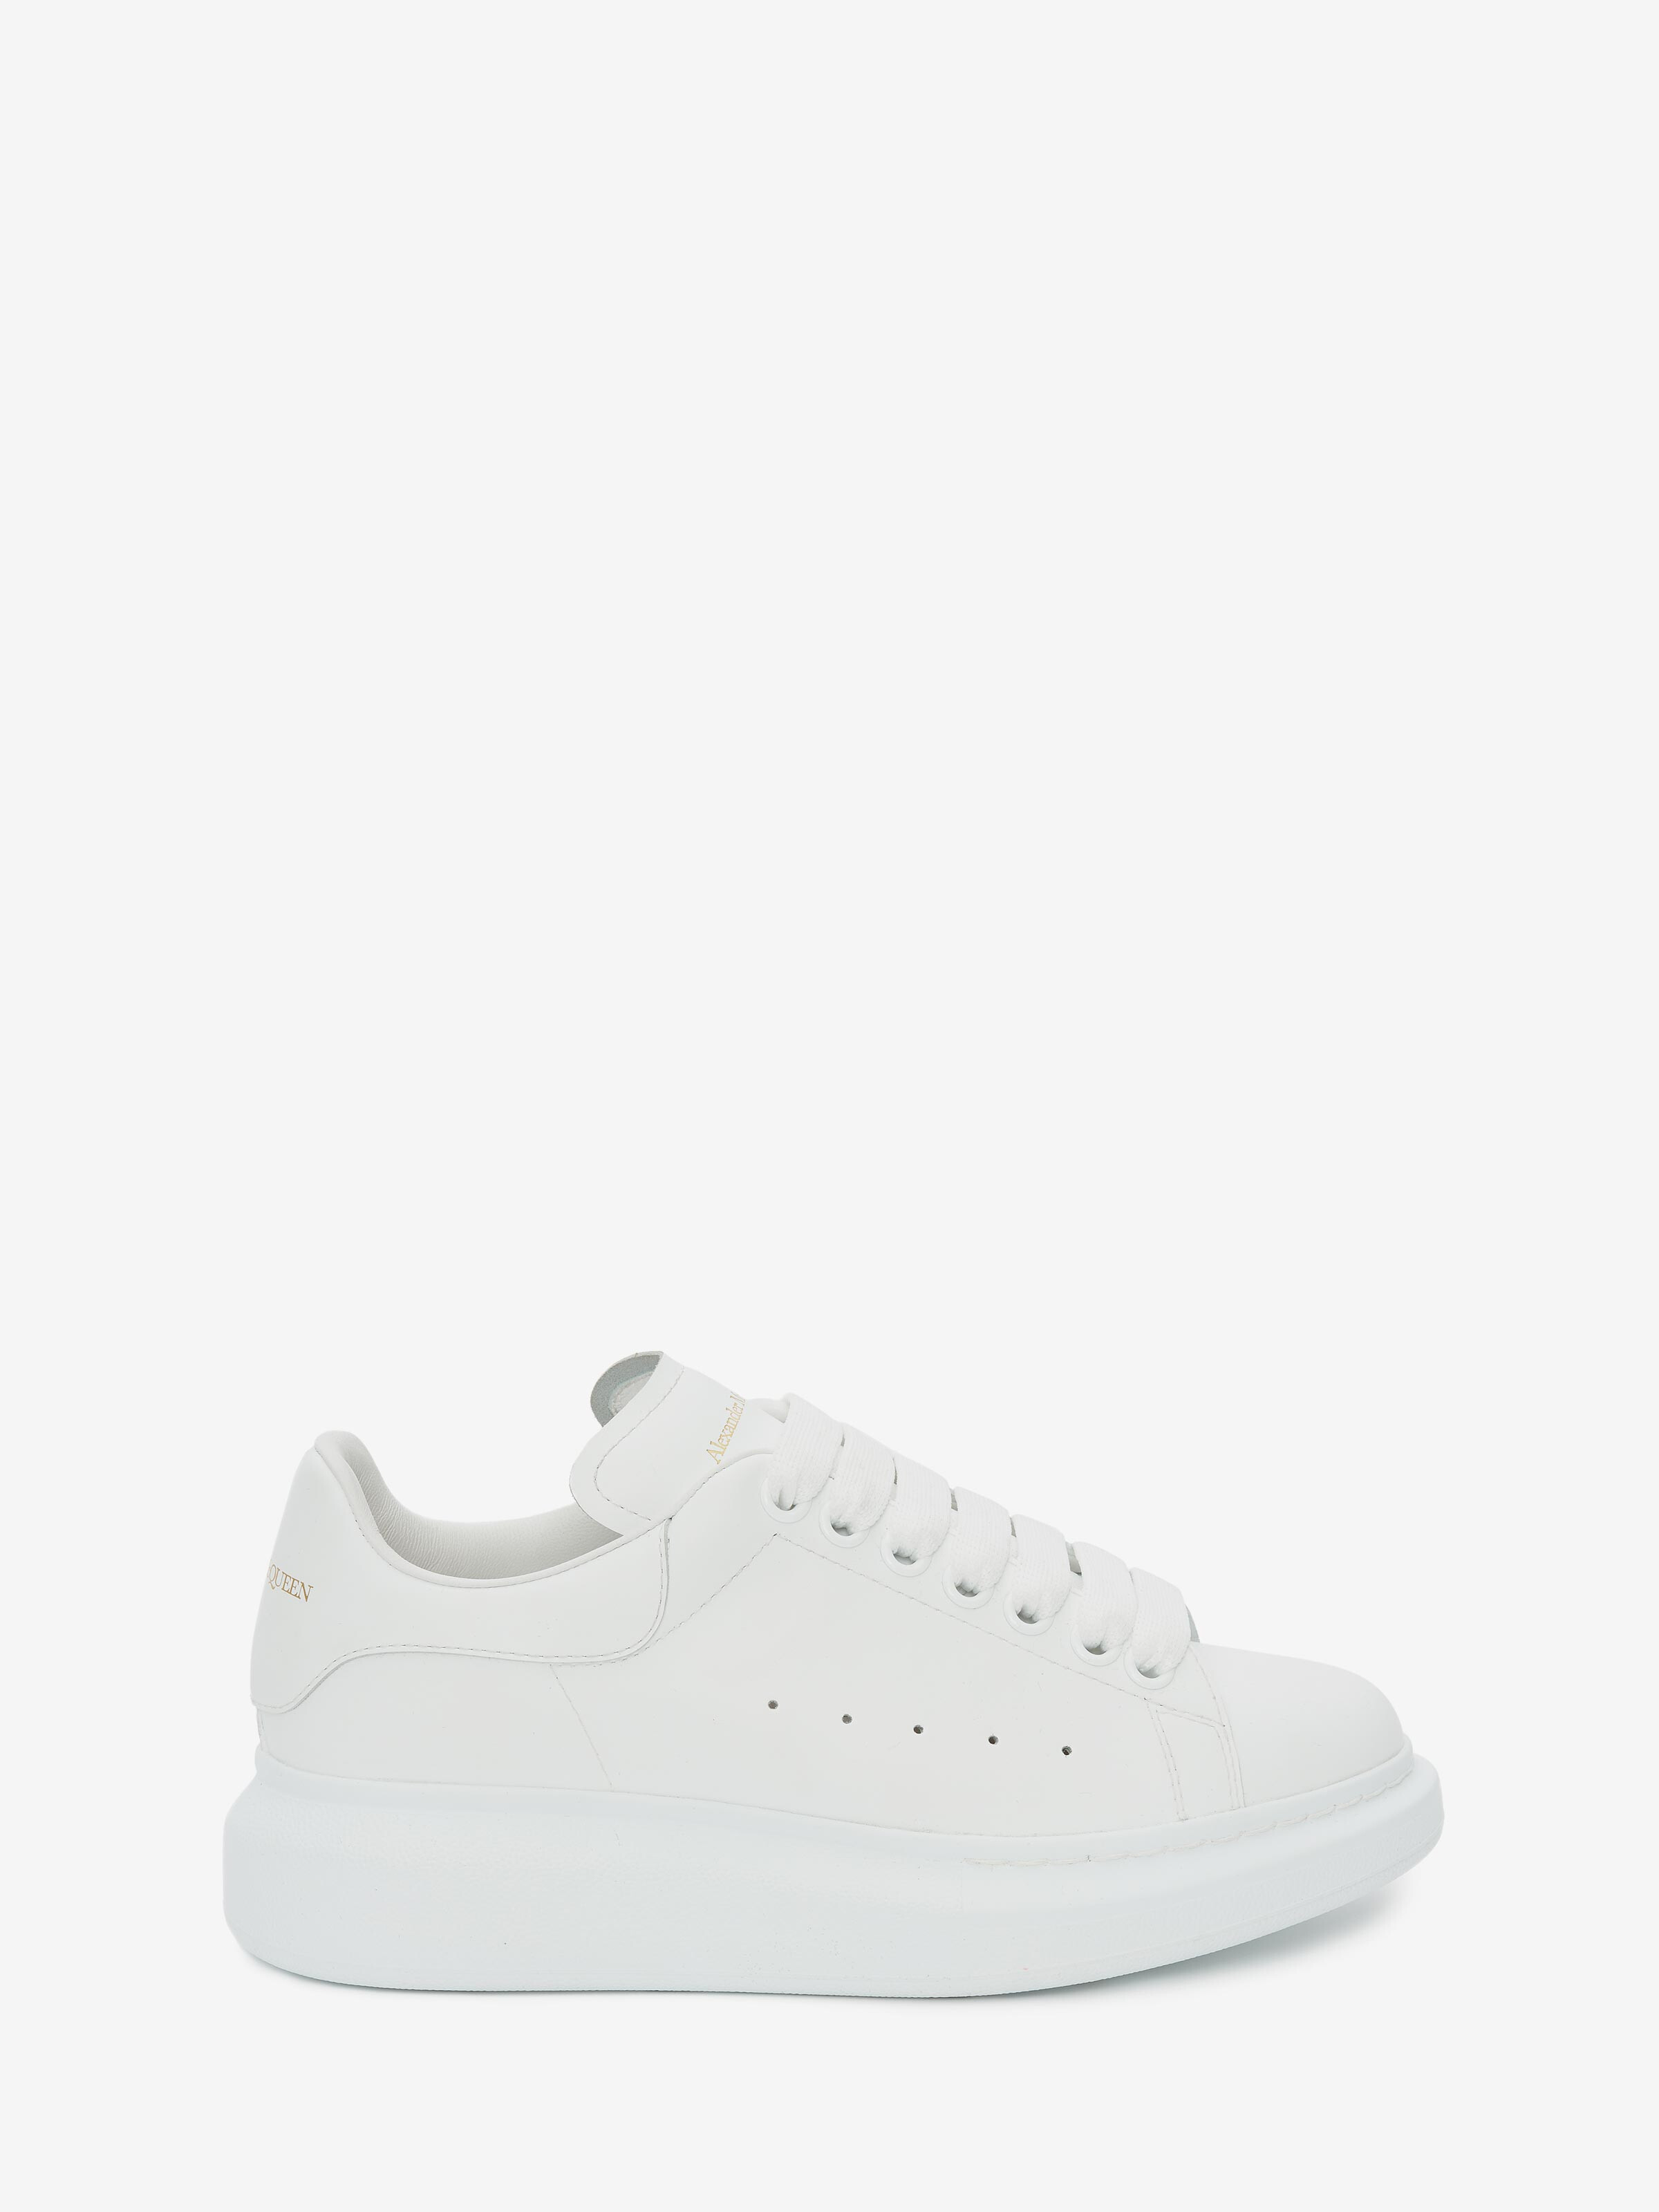 ALEXANDER MCQUEEN Glittered leather exaggerated-sole sneakers | NET-A-PORTER